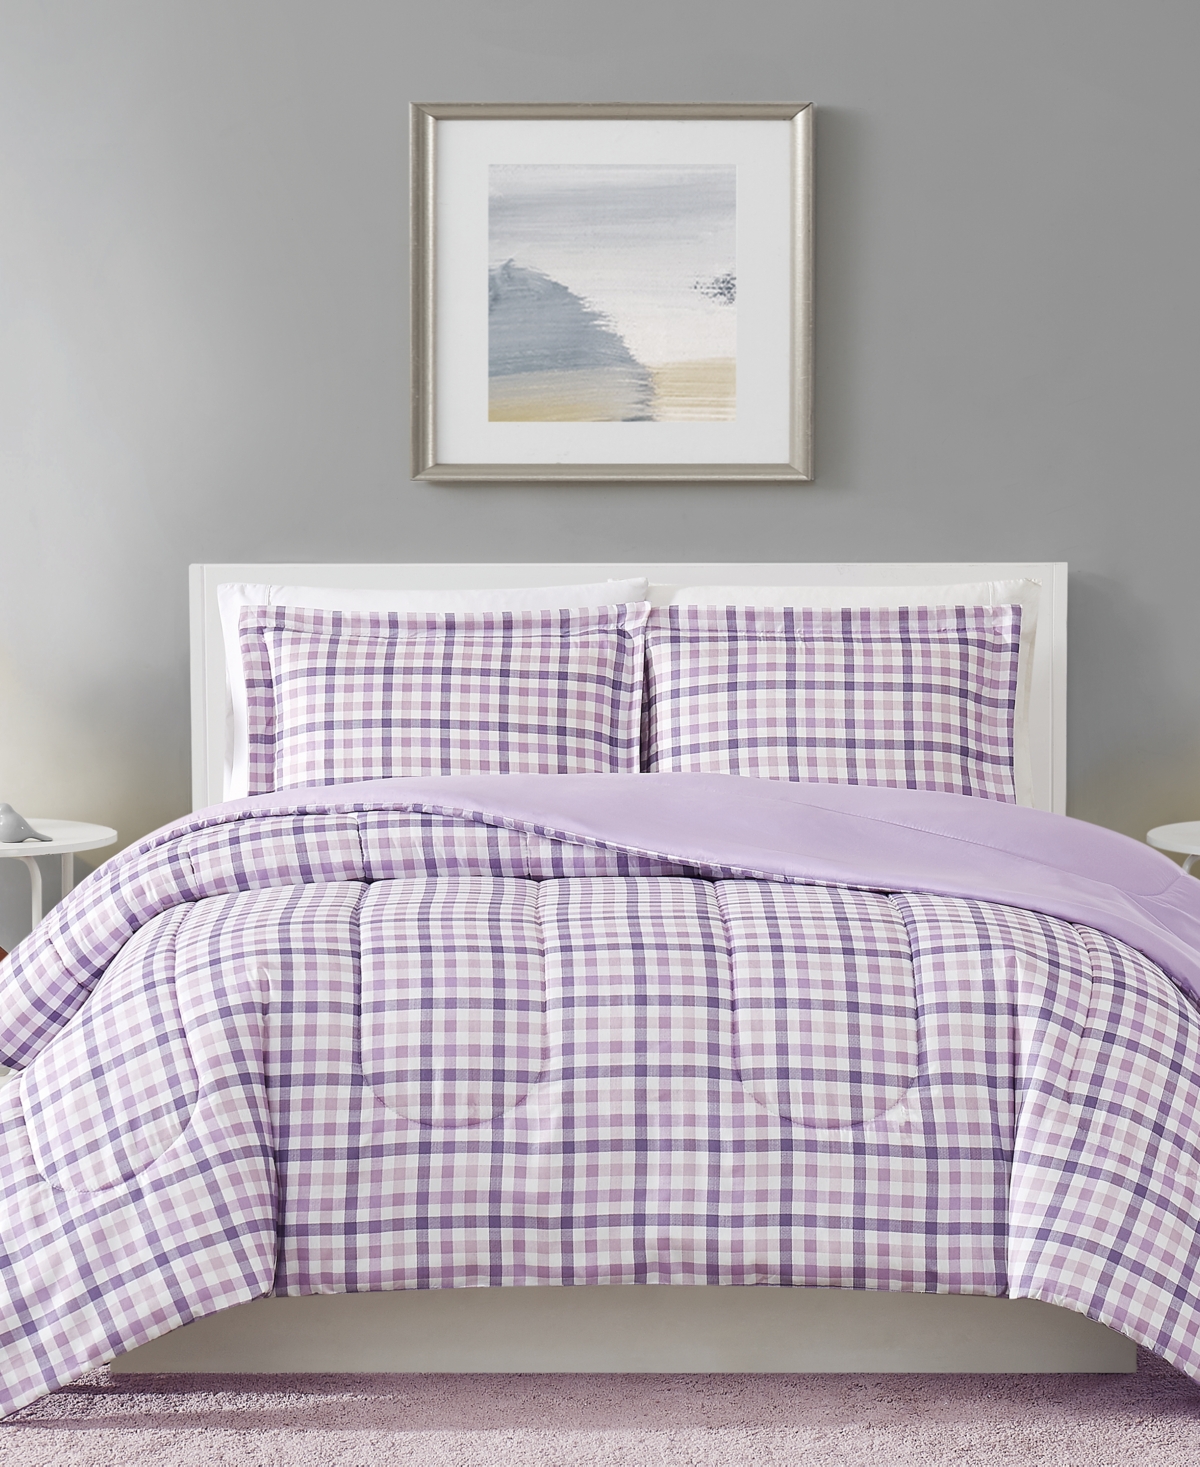 Pem America Lilac Gingham 3-pc. Comforter Sets, Created For Macy's Bedding In Pastel Purple